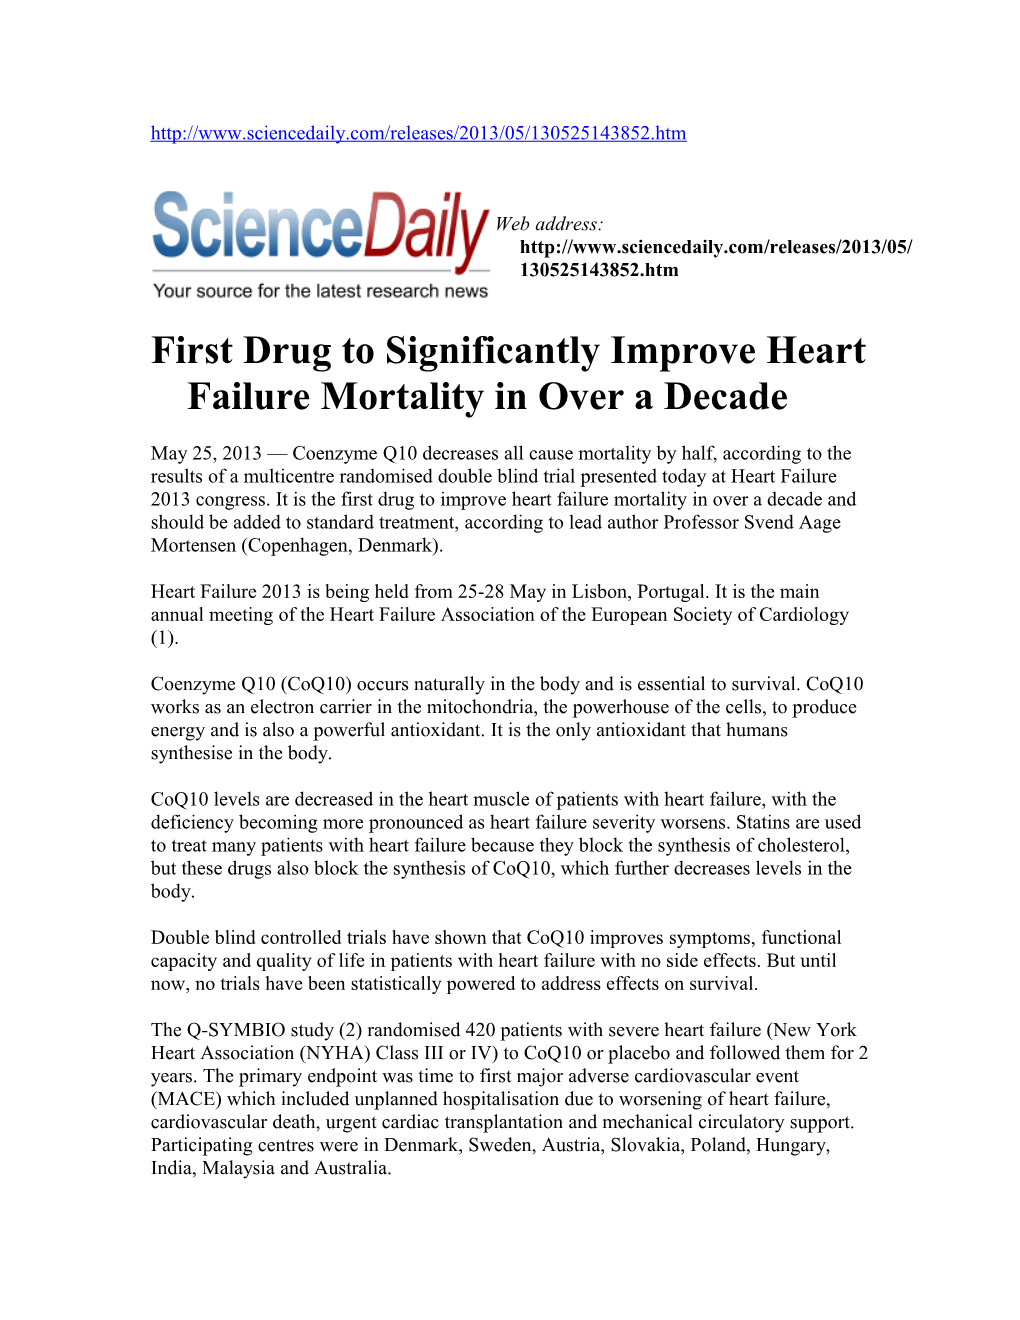 First Drug to Significantly Improve Heart Failure Mortality in Over a Decade